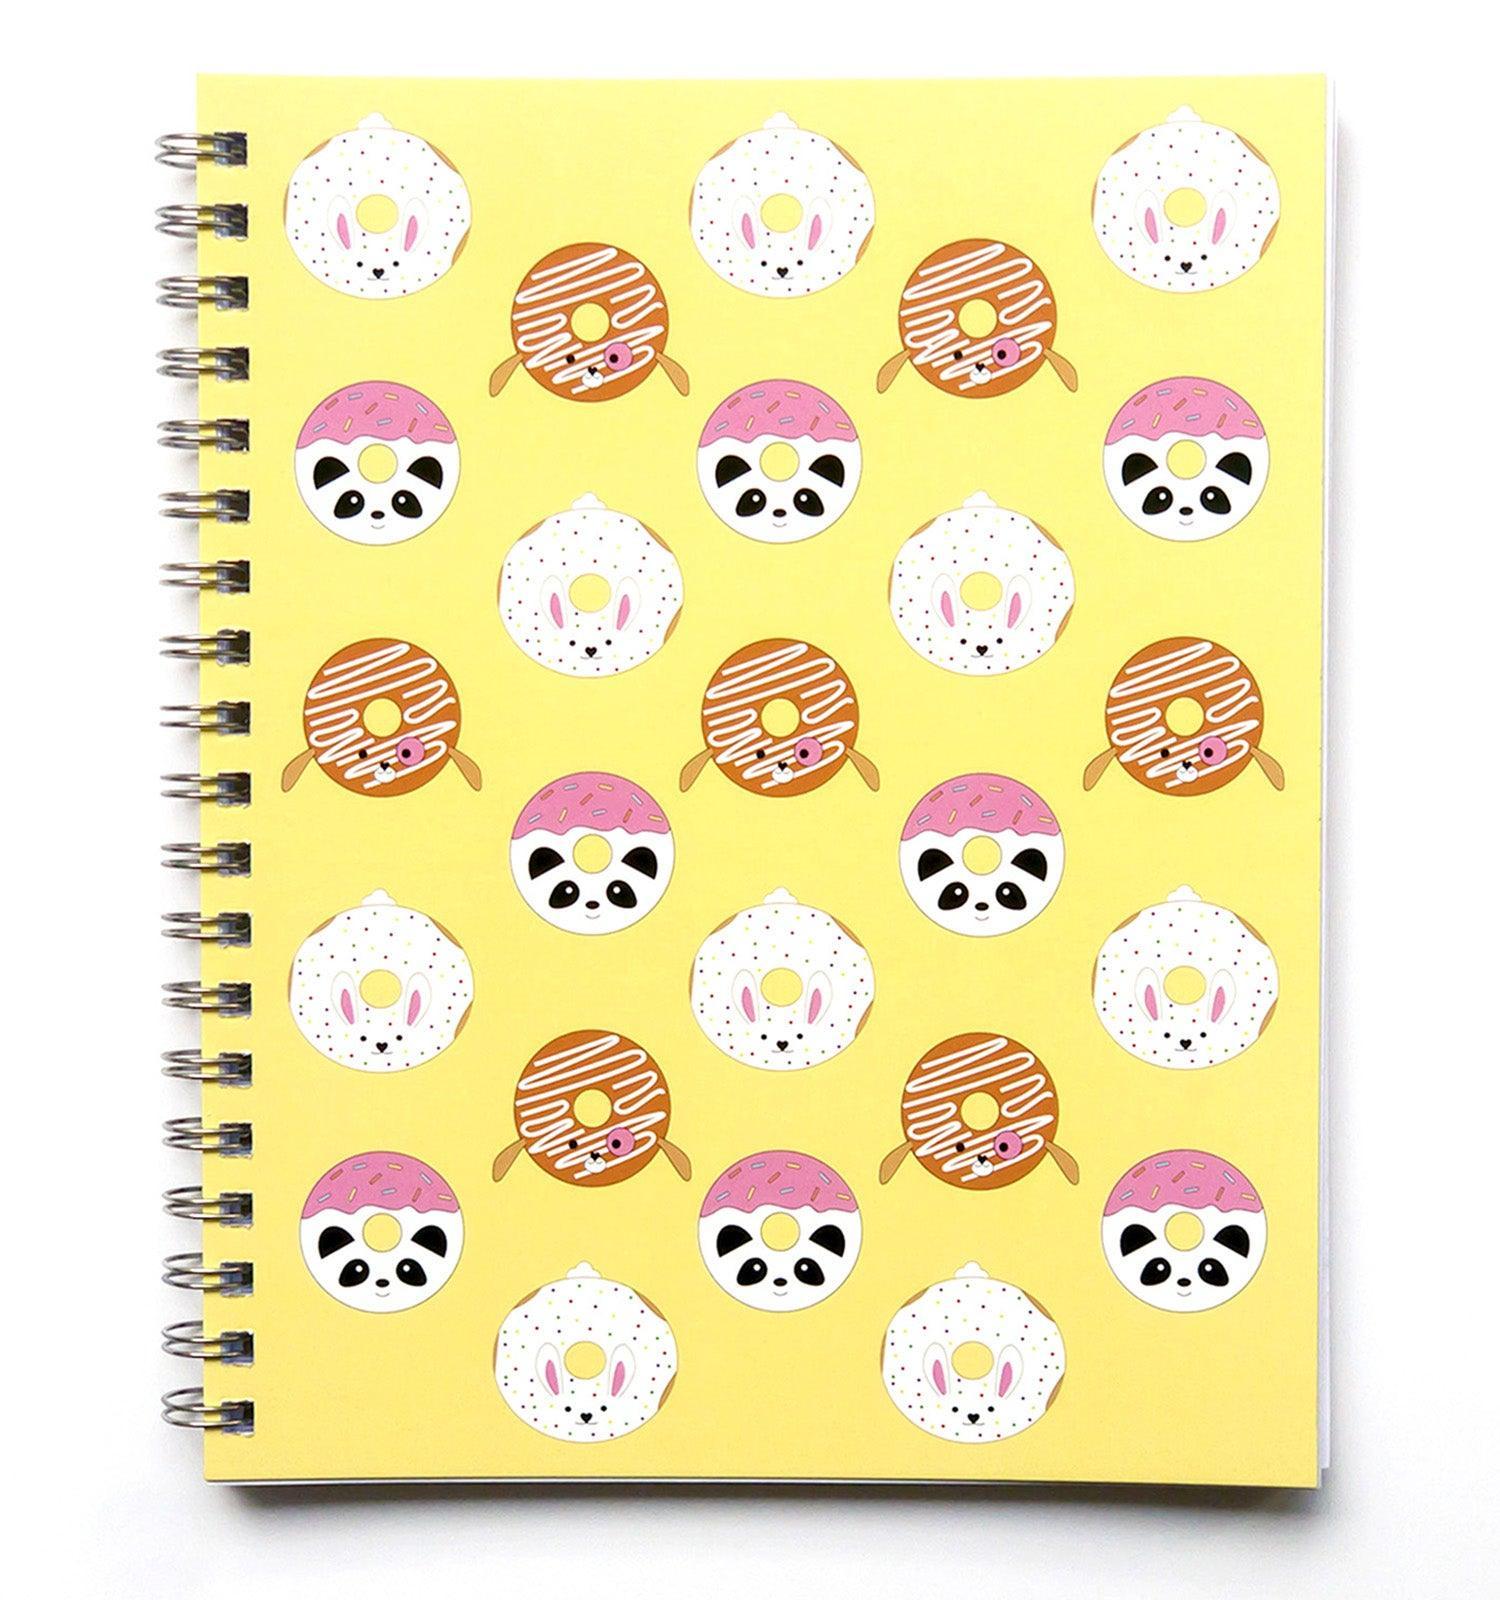 Donut Ever Give Up Journal - cute donut animal characters are playfully set against a yellow background